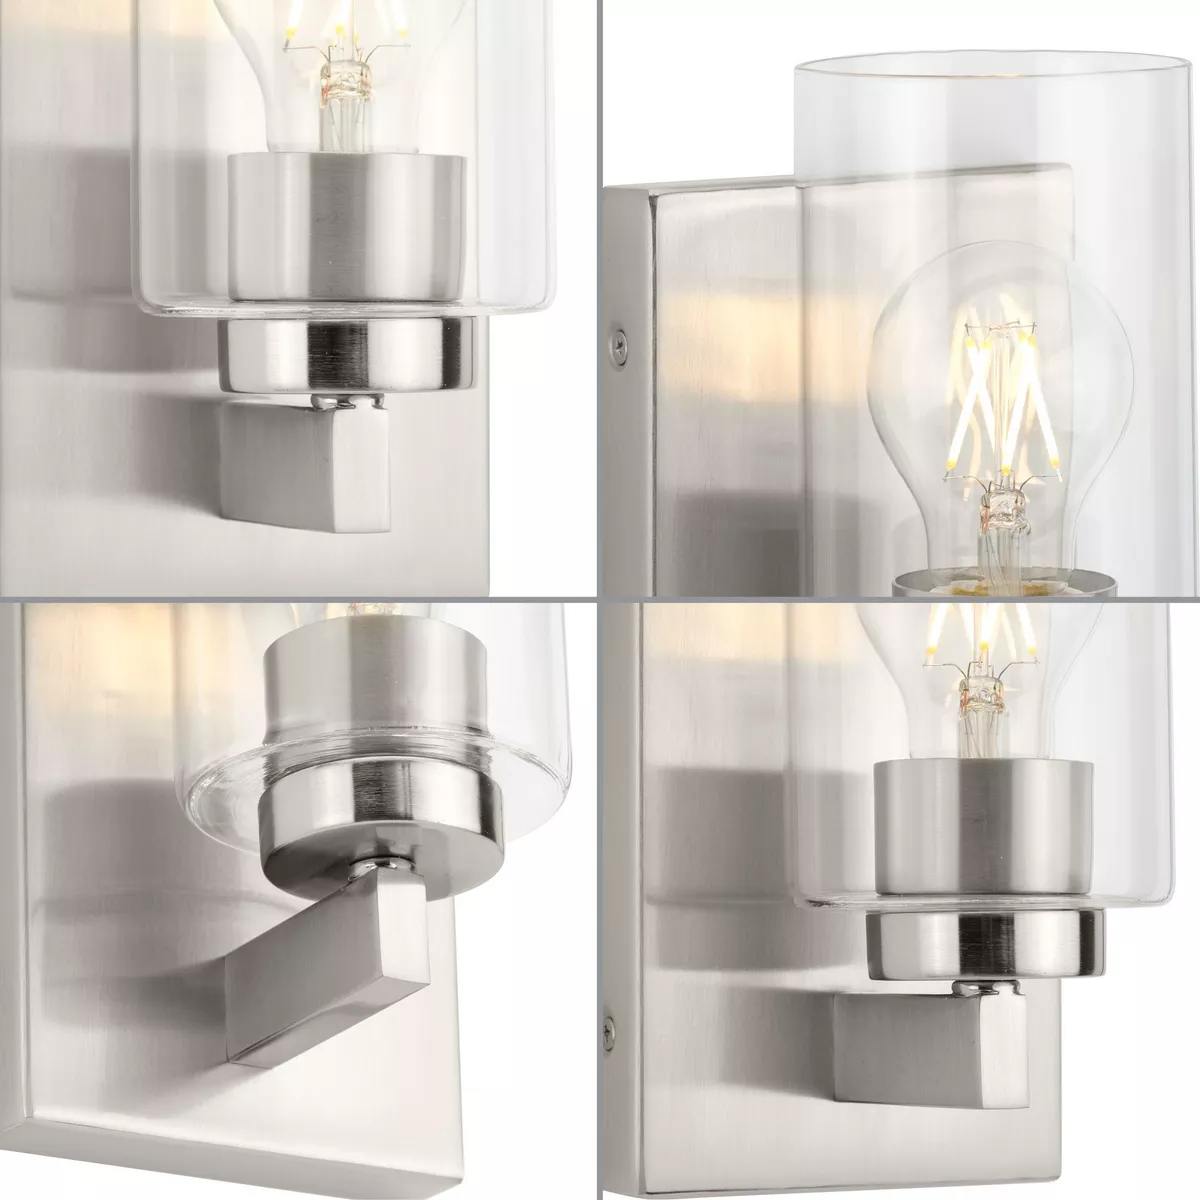 Goodwin 8 in. Bath Sconce - Bees Lighting